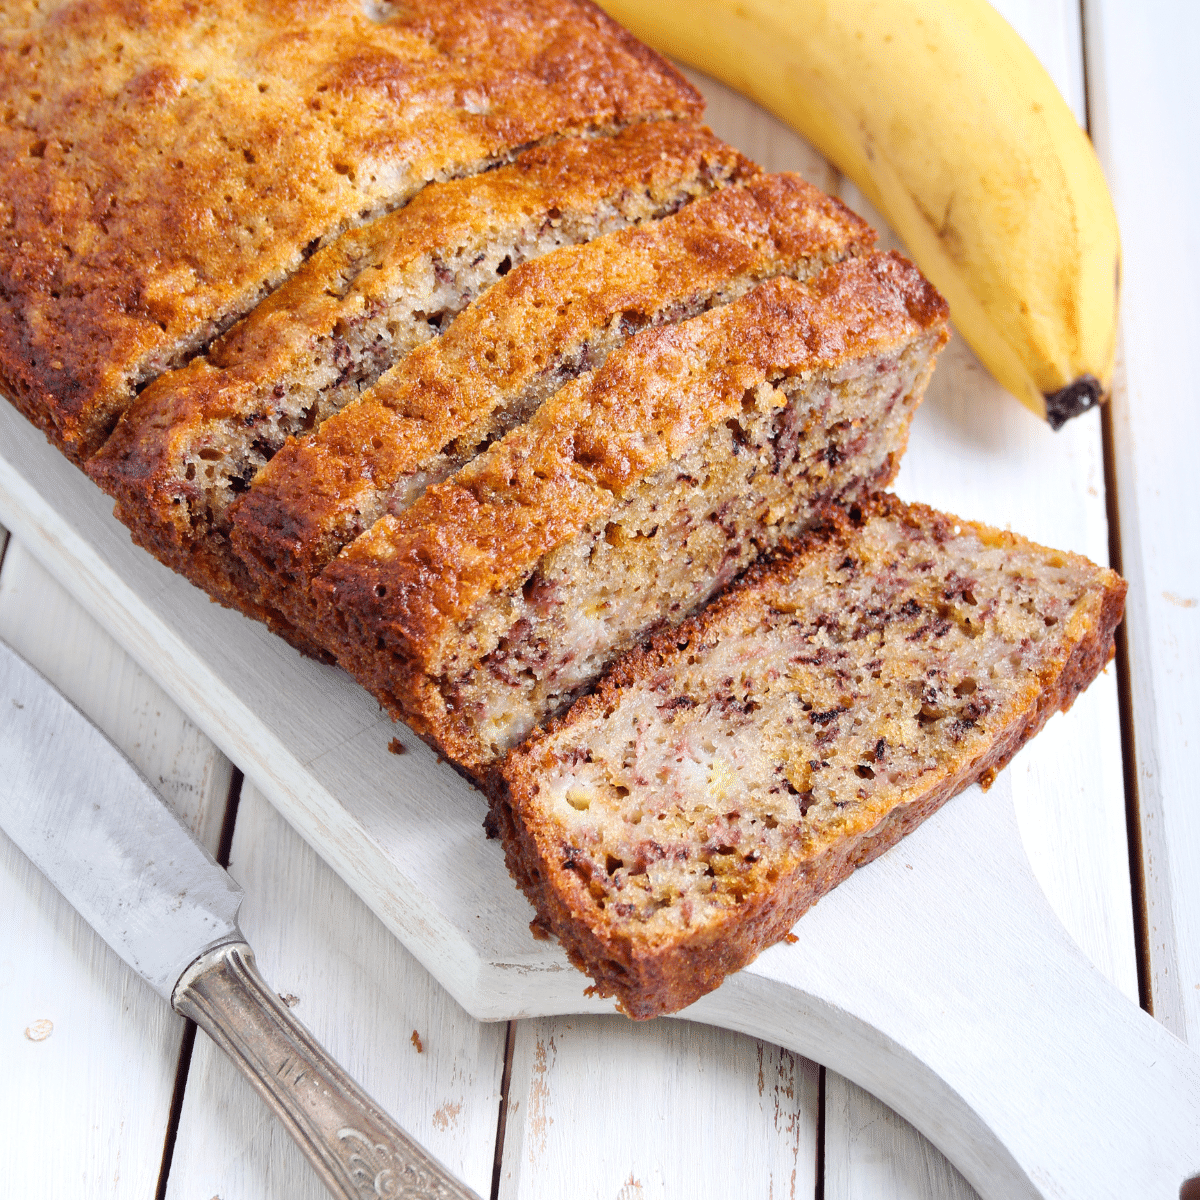 Homemade banana nut bread loaf cut into slices on a white wooden board.